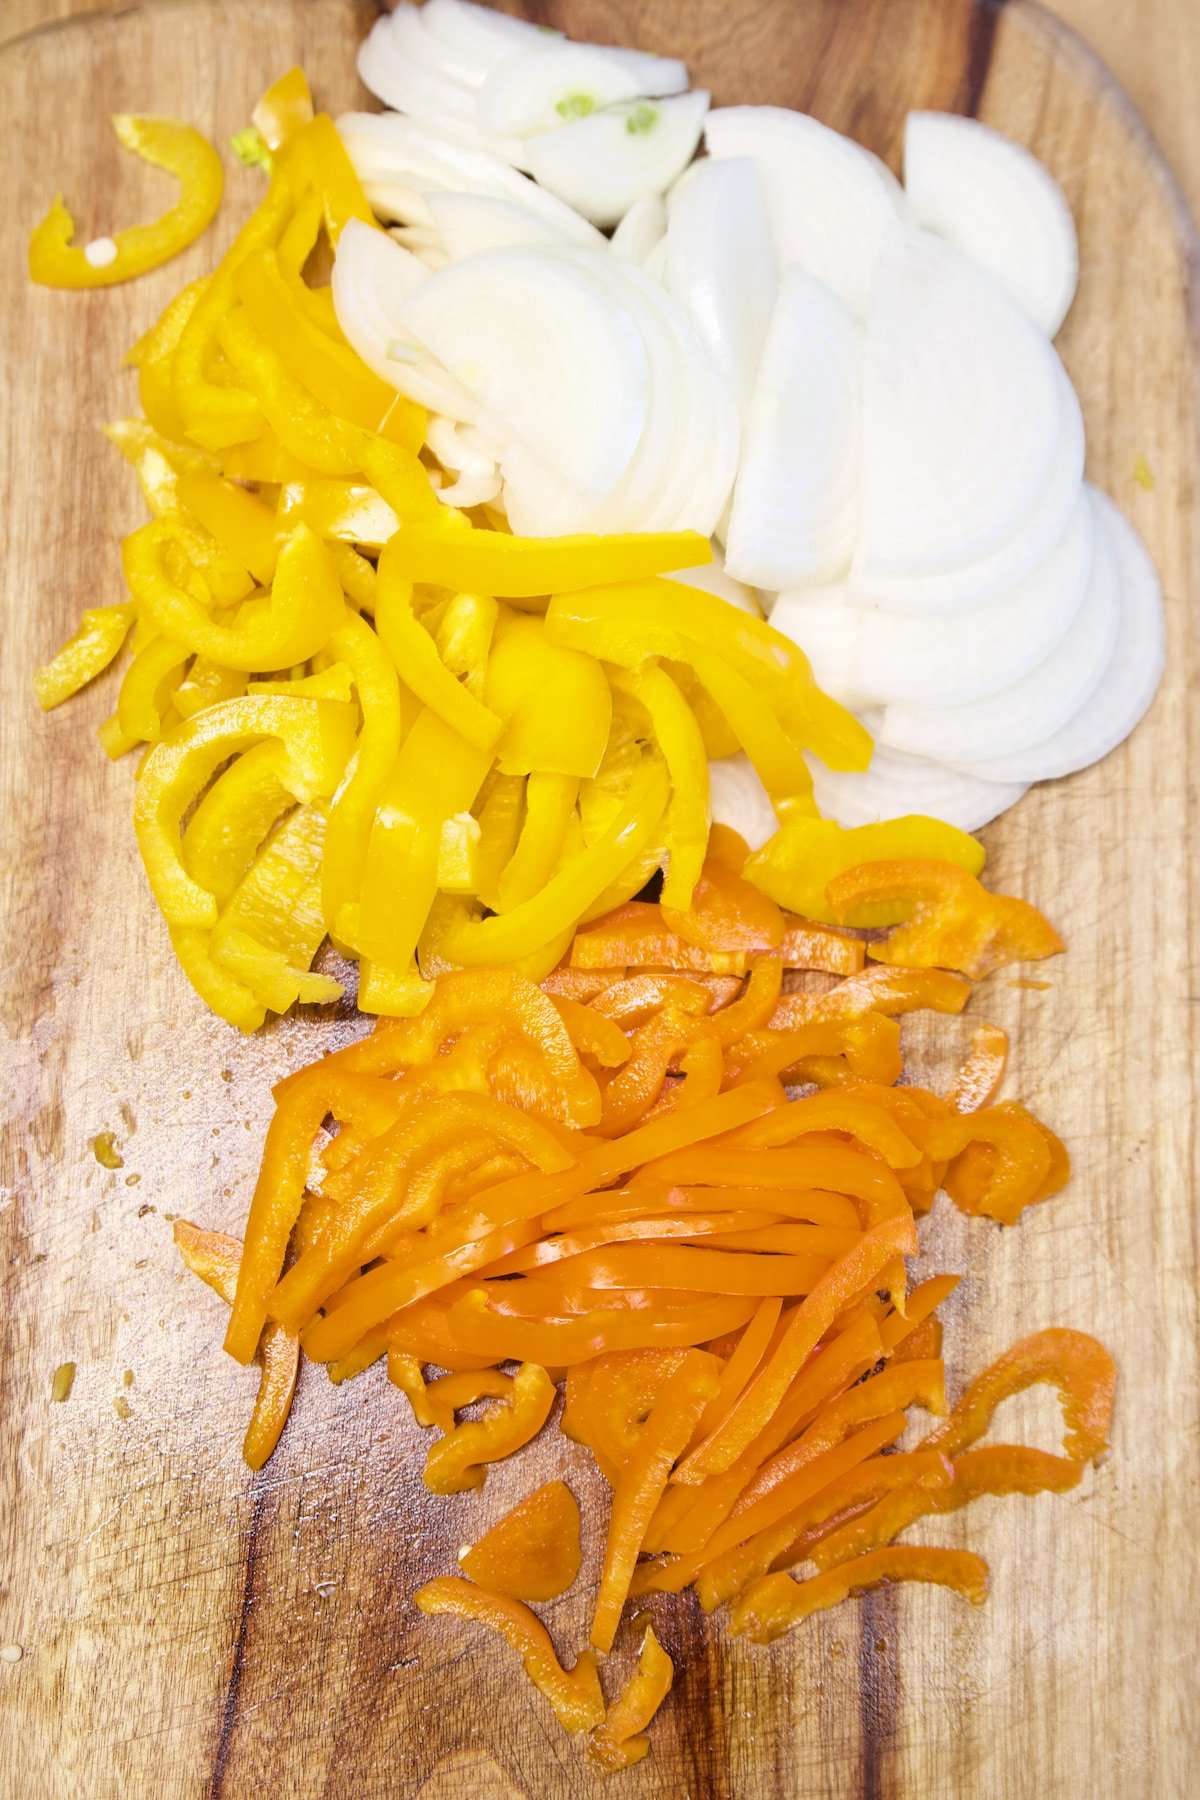 Sliced yellow and orange bell peppers, onions.